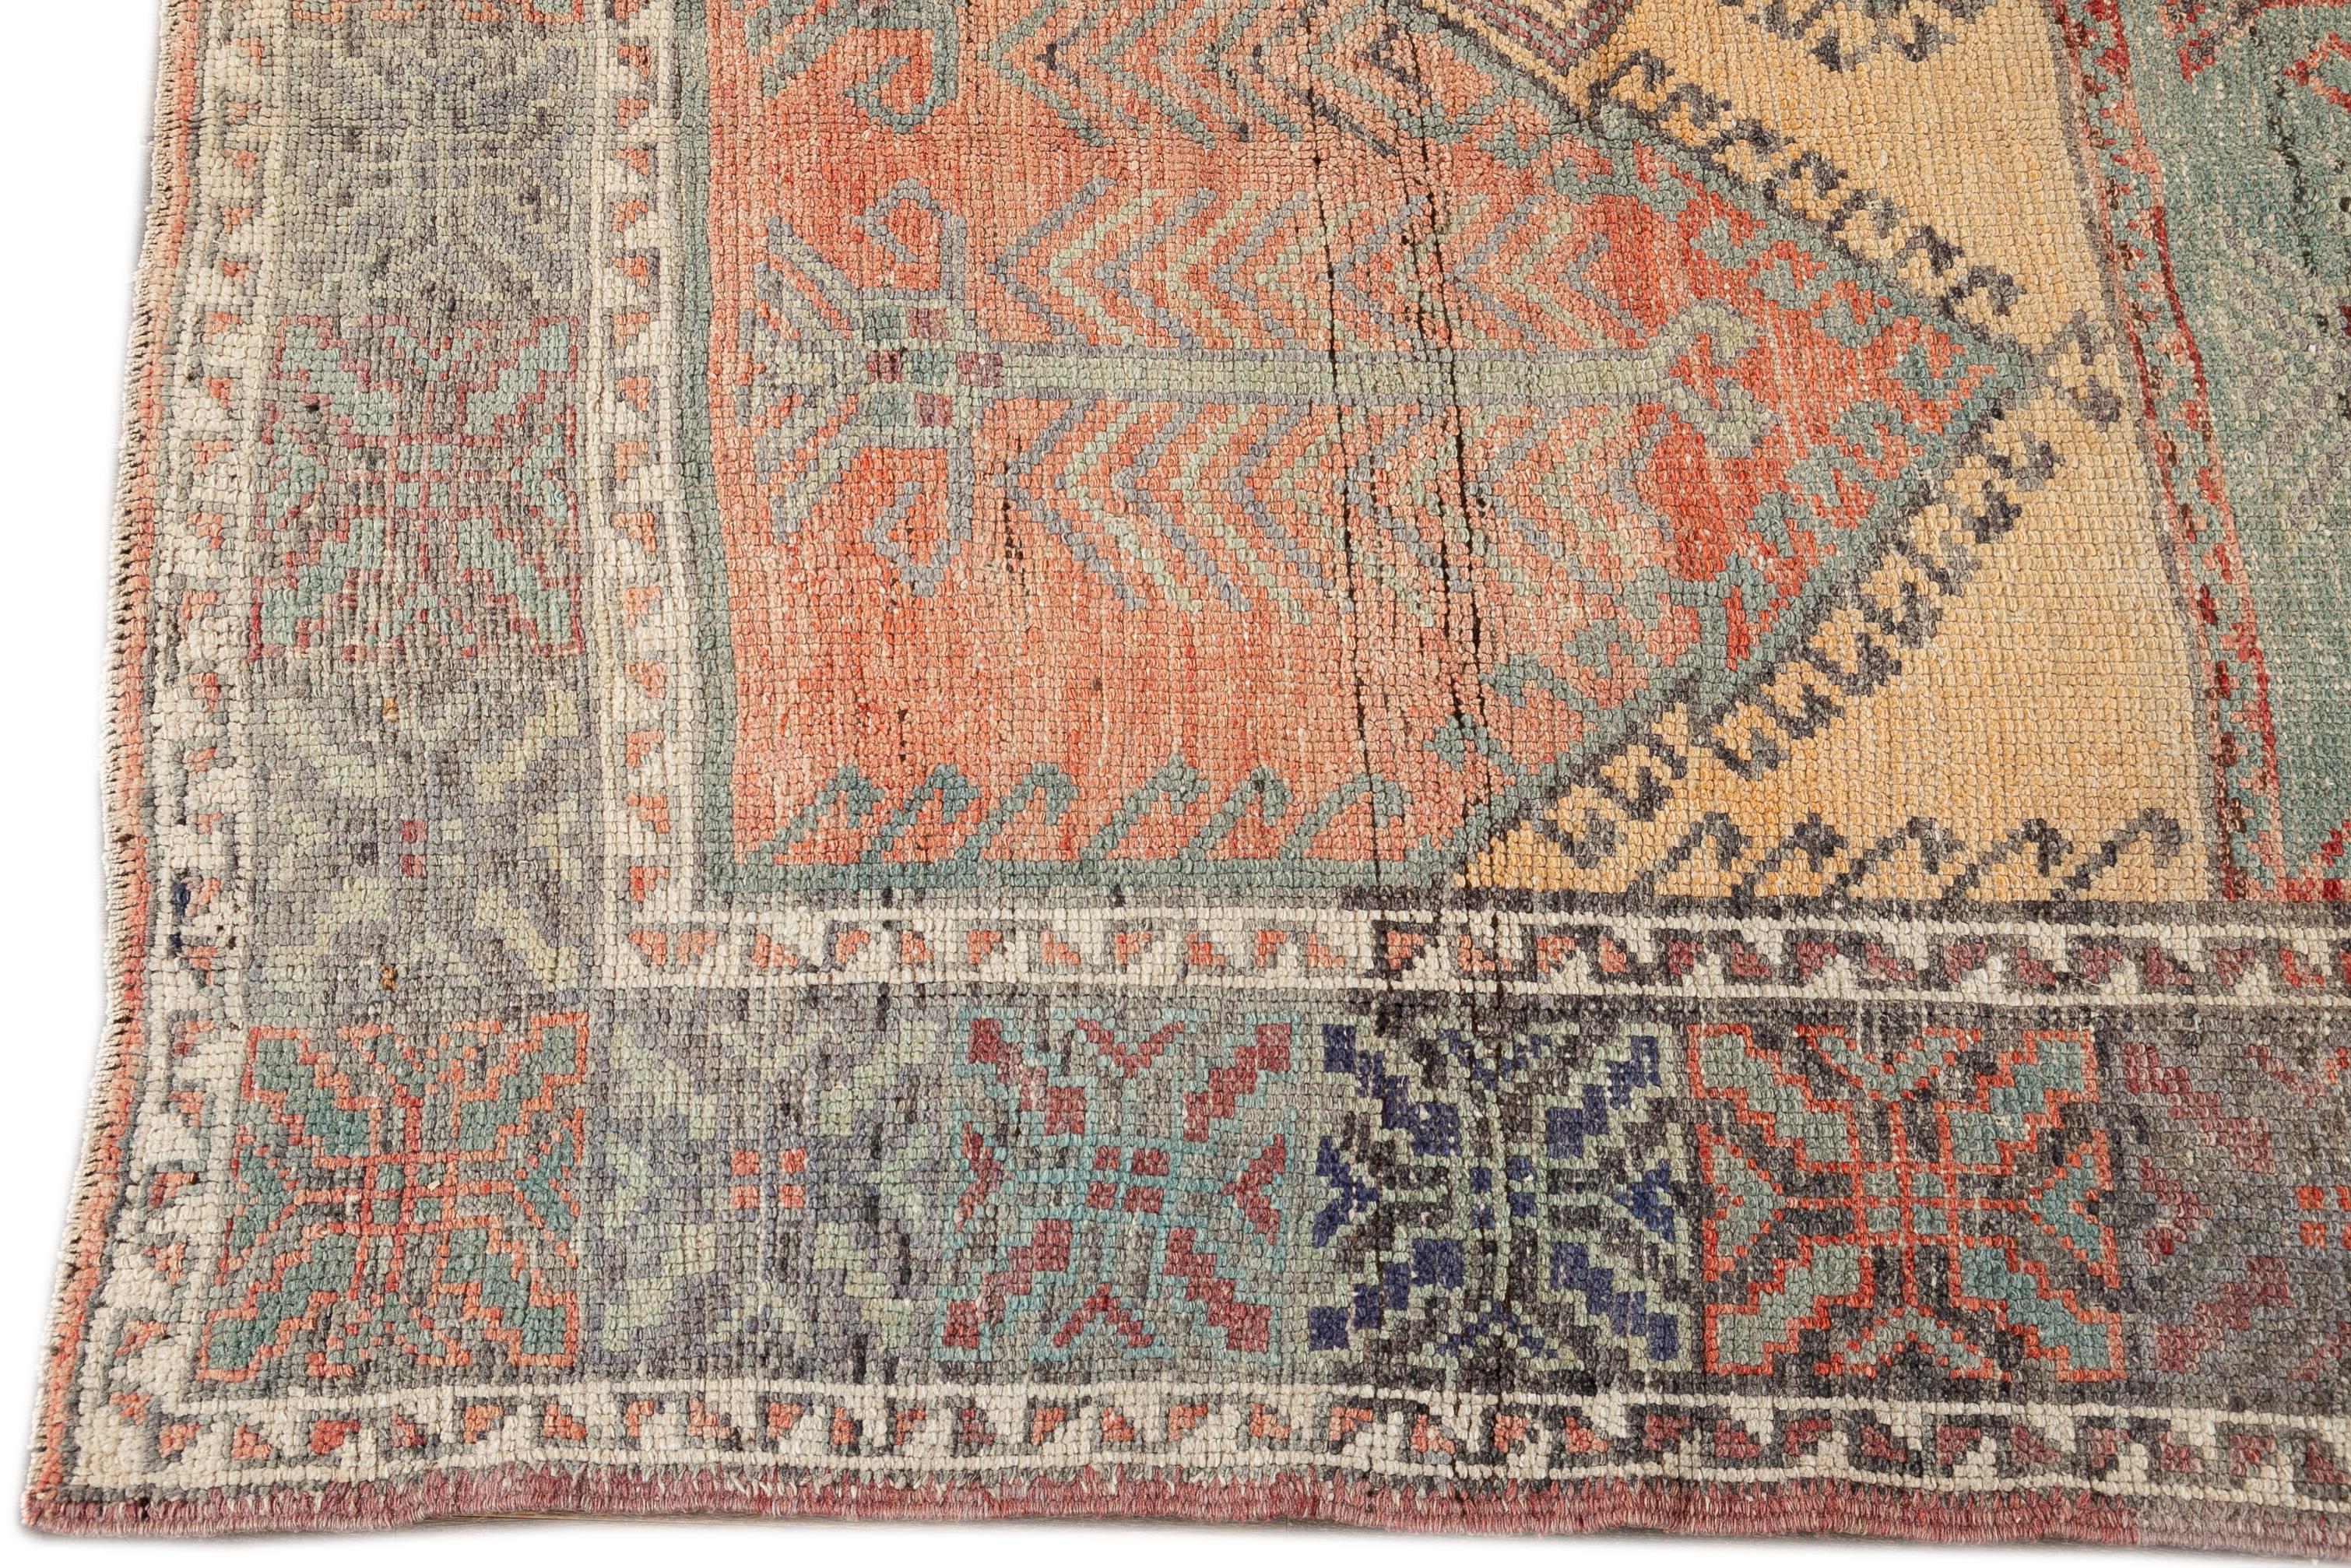 Early 20th Century Antique Anatolian Wool Runner Rug In Good Condition For Sale In Norwalk, CT